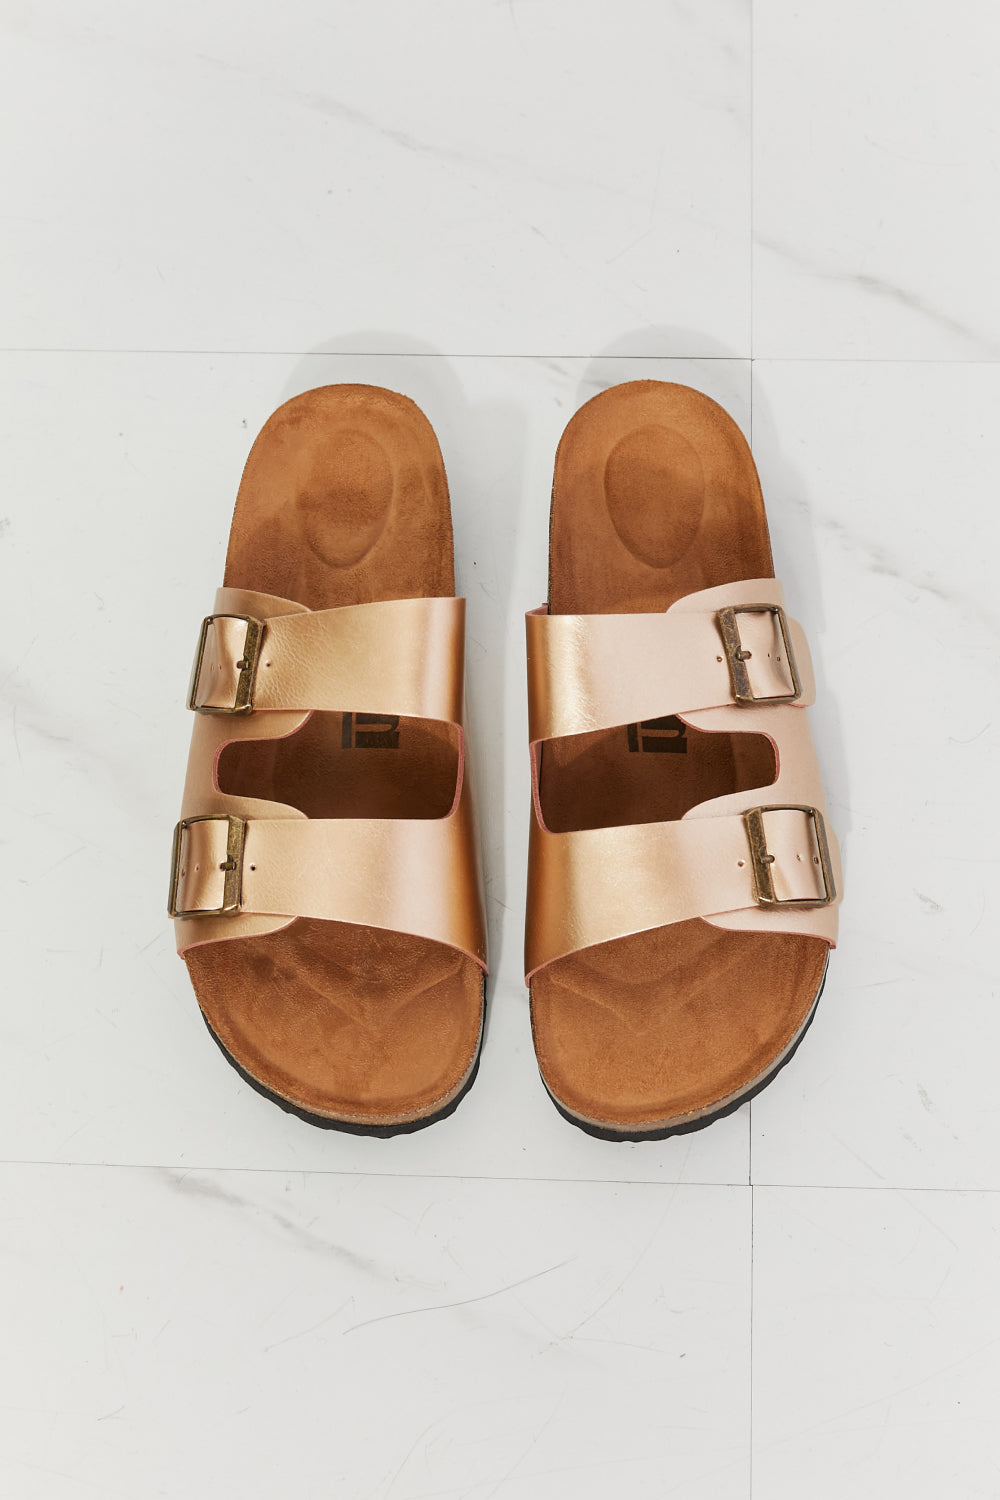 - MMShoes Best Life Double-Banded Slide Sandal in Gold - Ships from The US - womens slides at TFC&H Co.